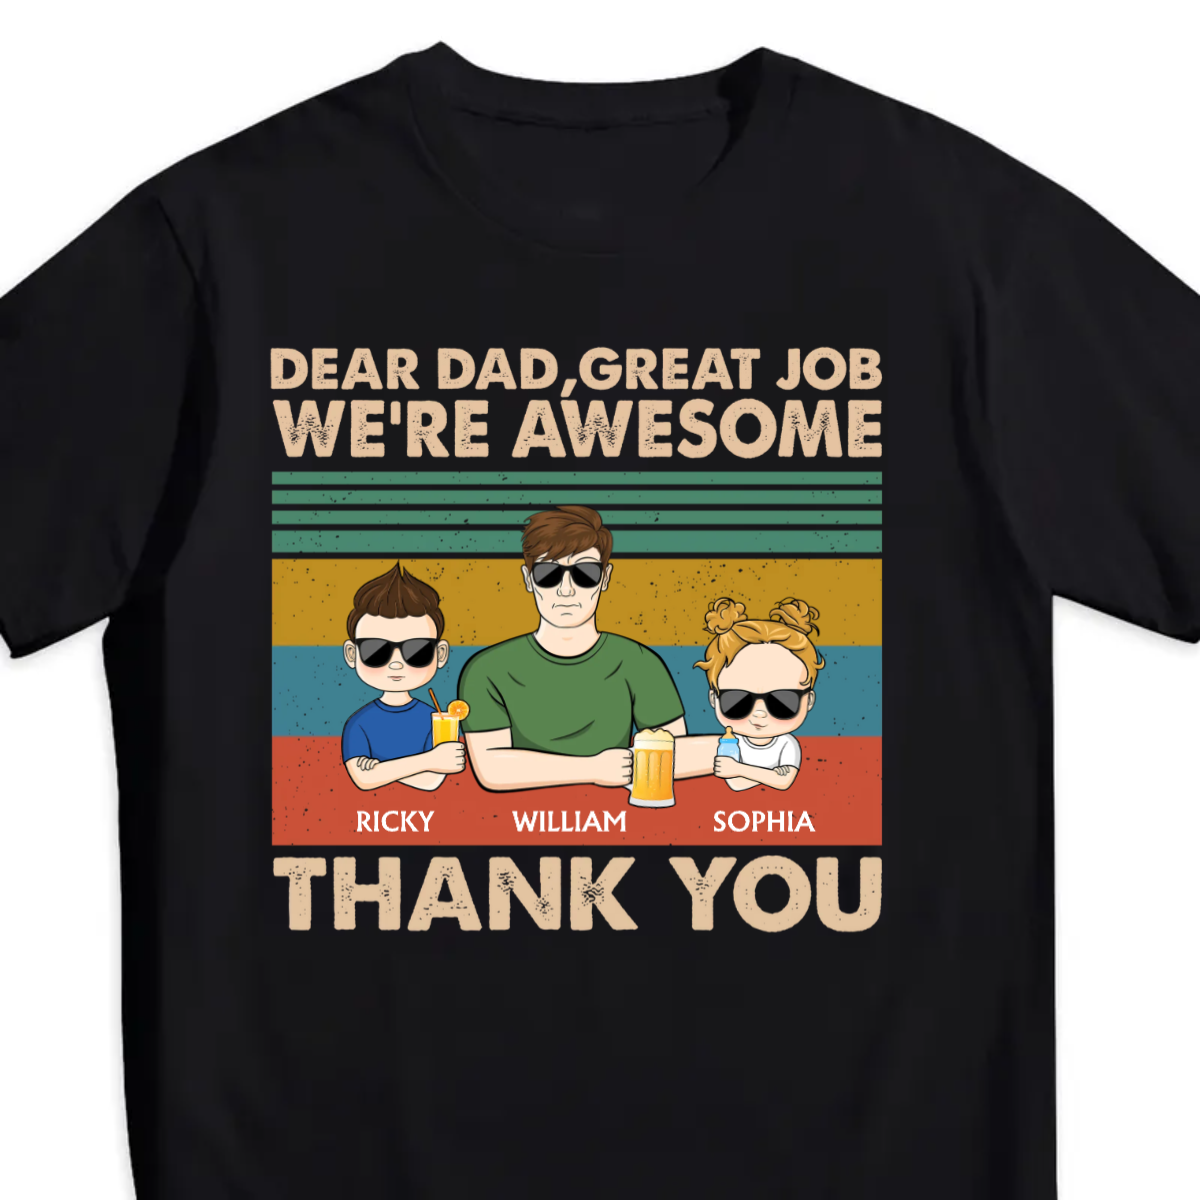 Dear Dad Grandpa Great Job We're Awesome Thank You Young - Father Gift - Personalized Children's T-shirt